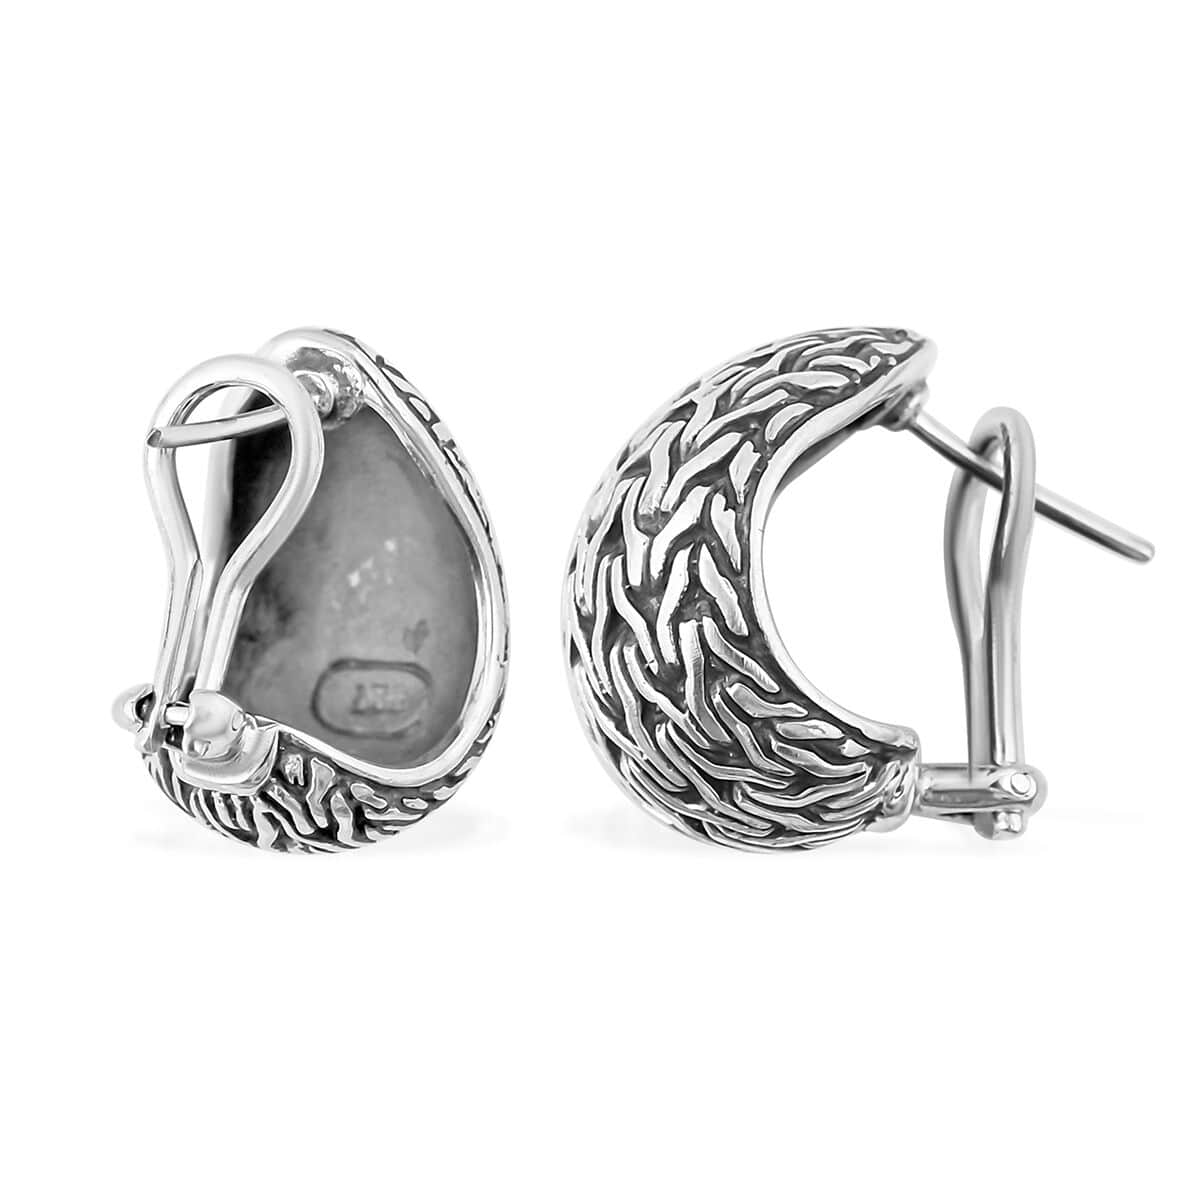 Bali Legacy Tulang Naga Texture Ring (Size 7) and Earrings in Sterling Silver 22.40 Grams image number 6